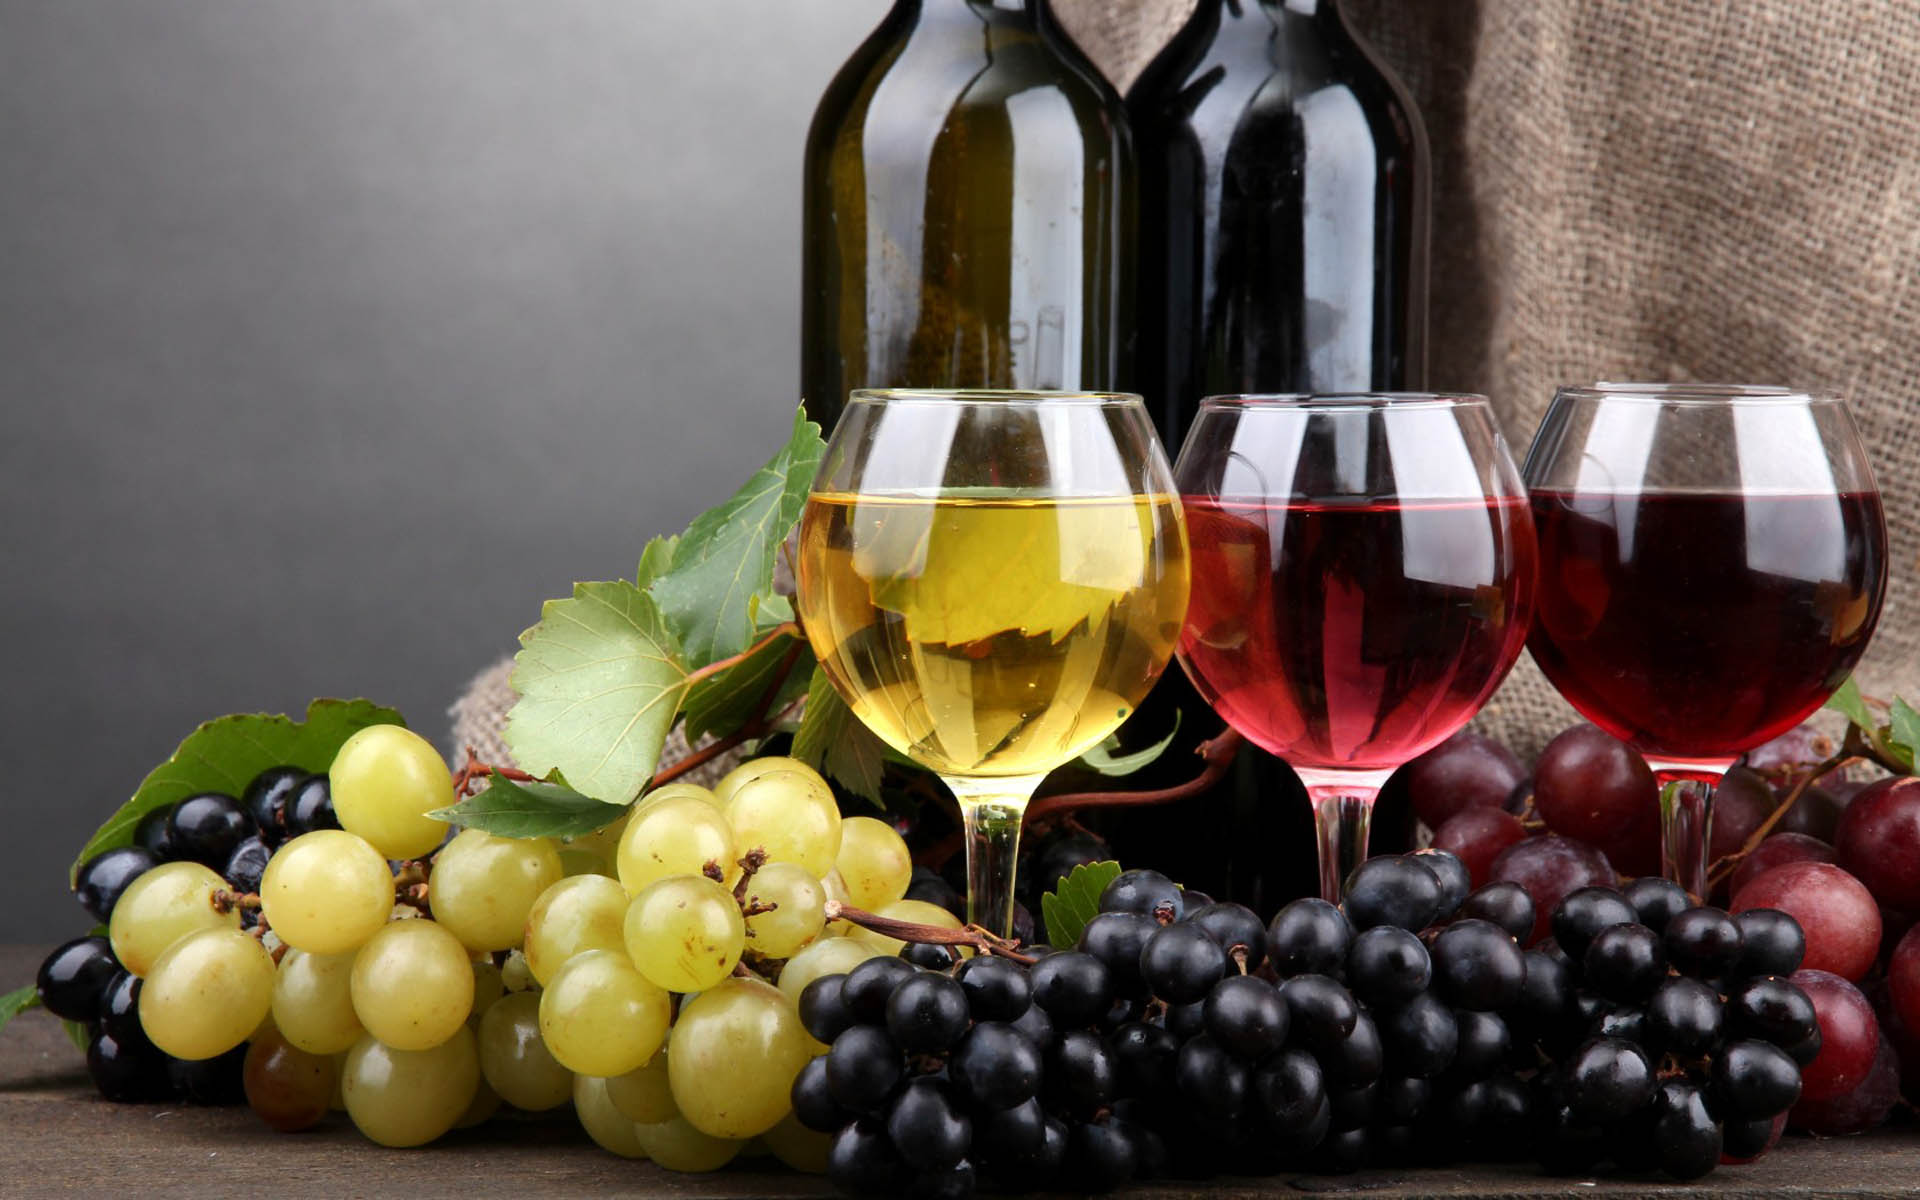 Which countries drink the most wine?